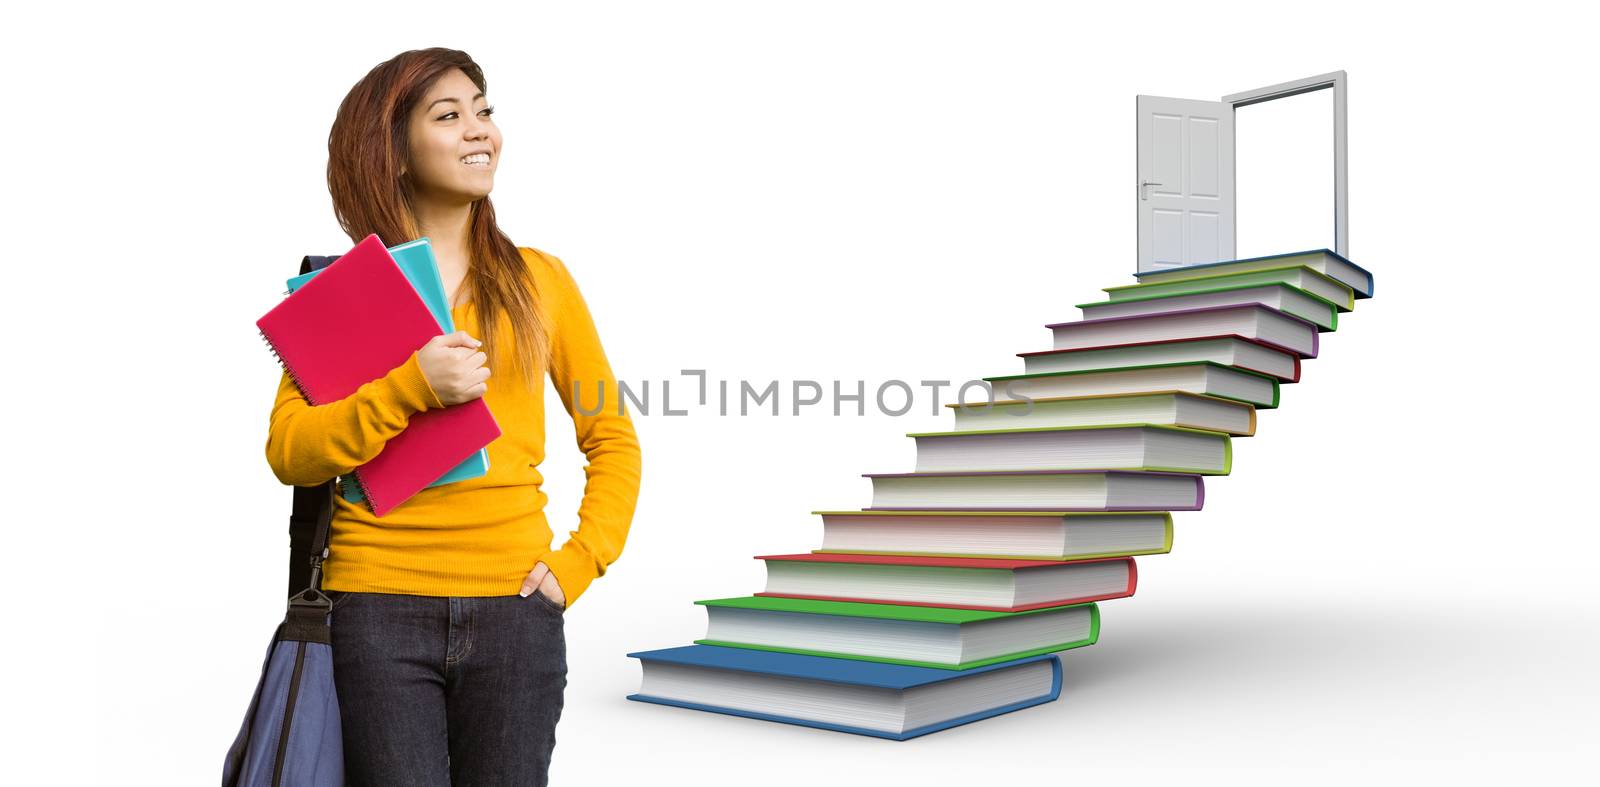 Female college student with books in park against steps made from books leading to open door